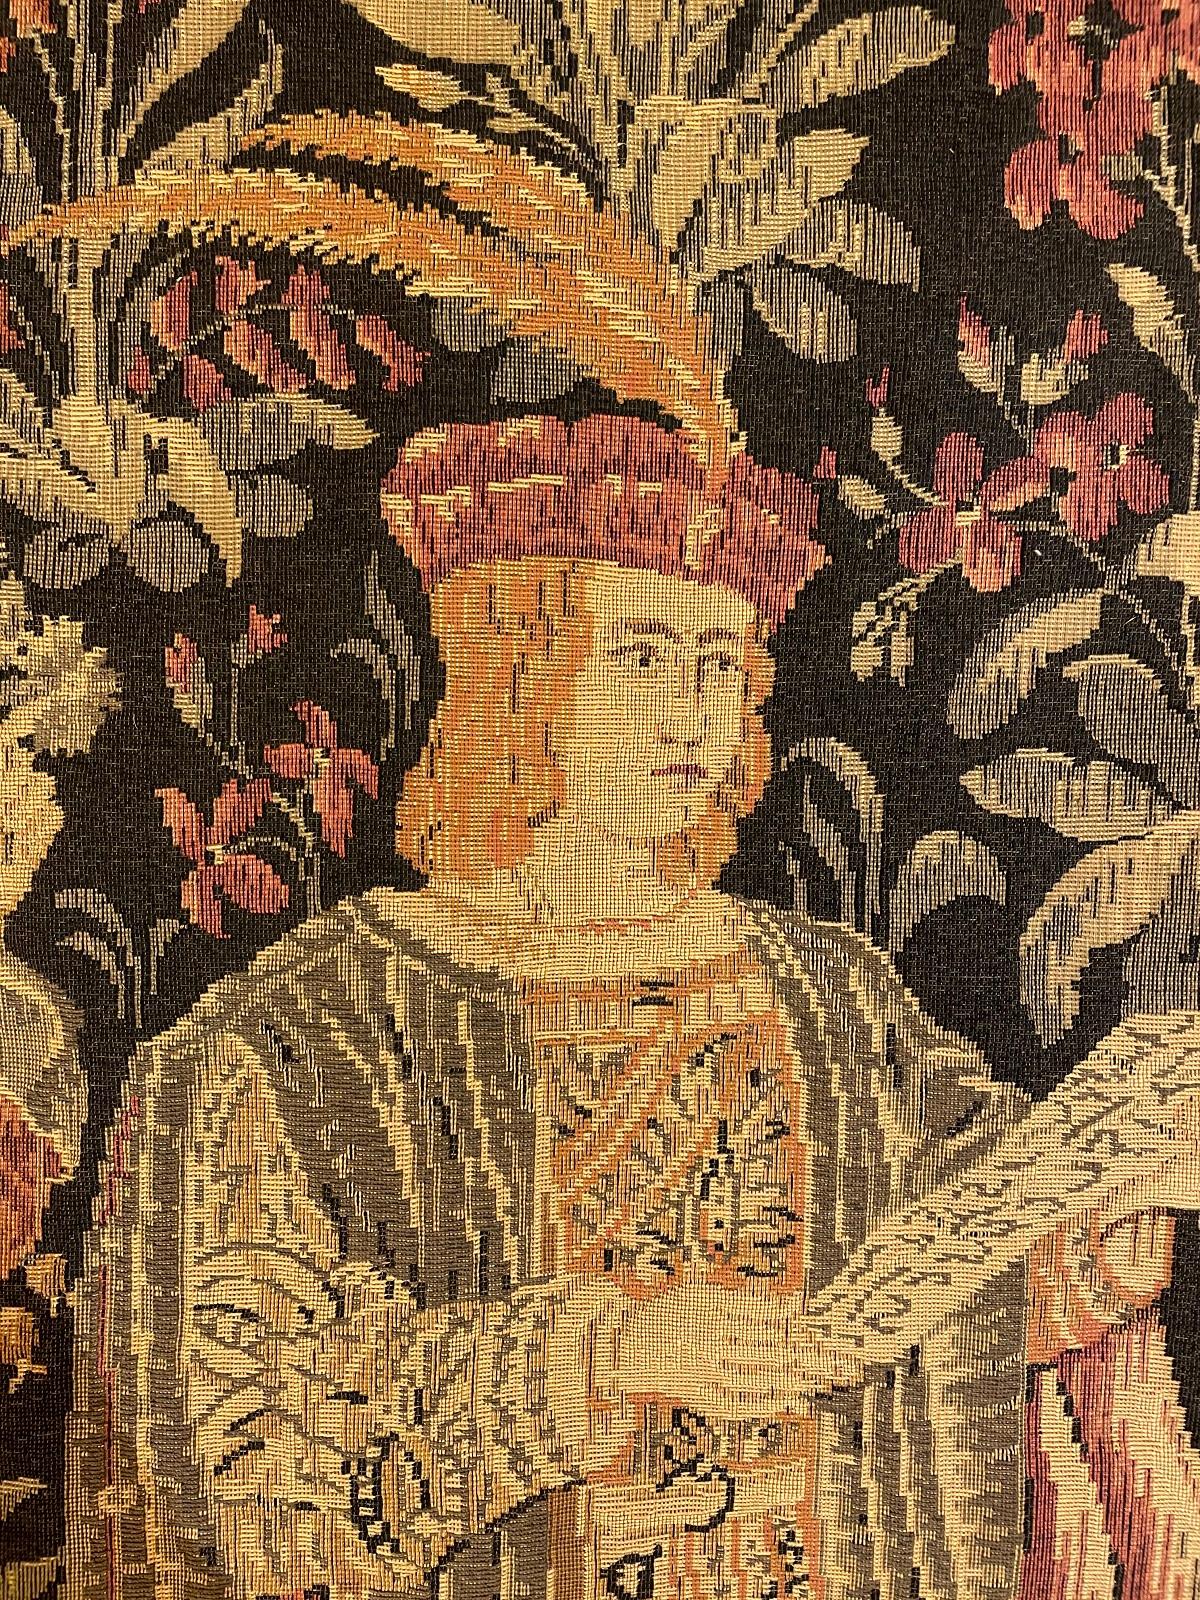 20th Century Medieval Tapestry Characters Surrounded by A Thousand Flowers